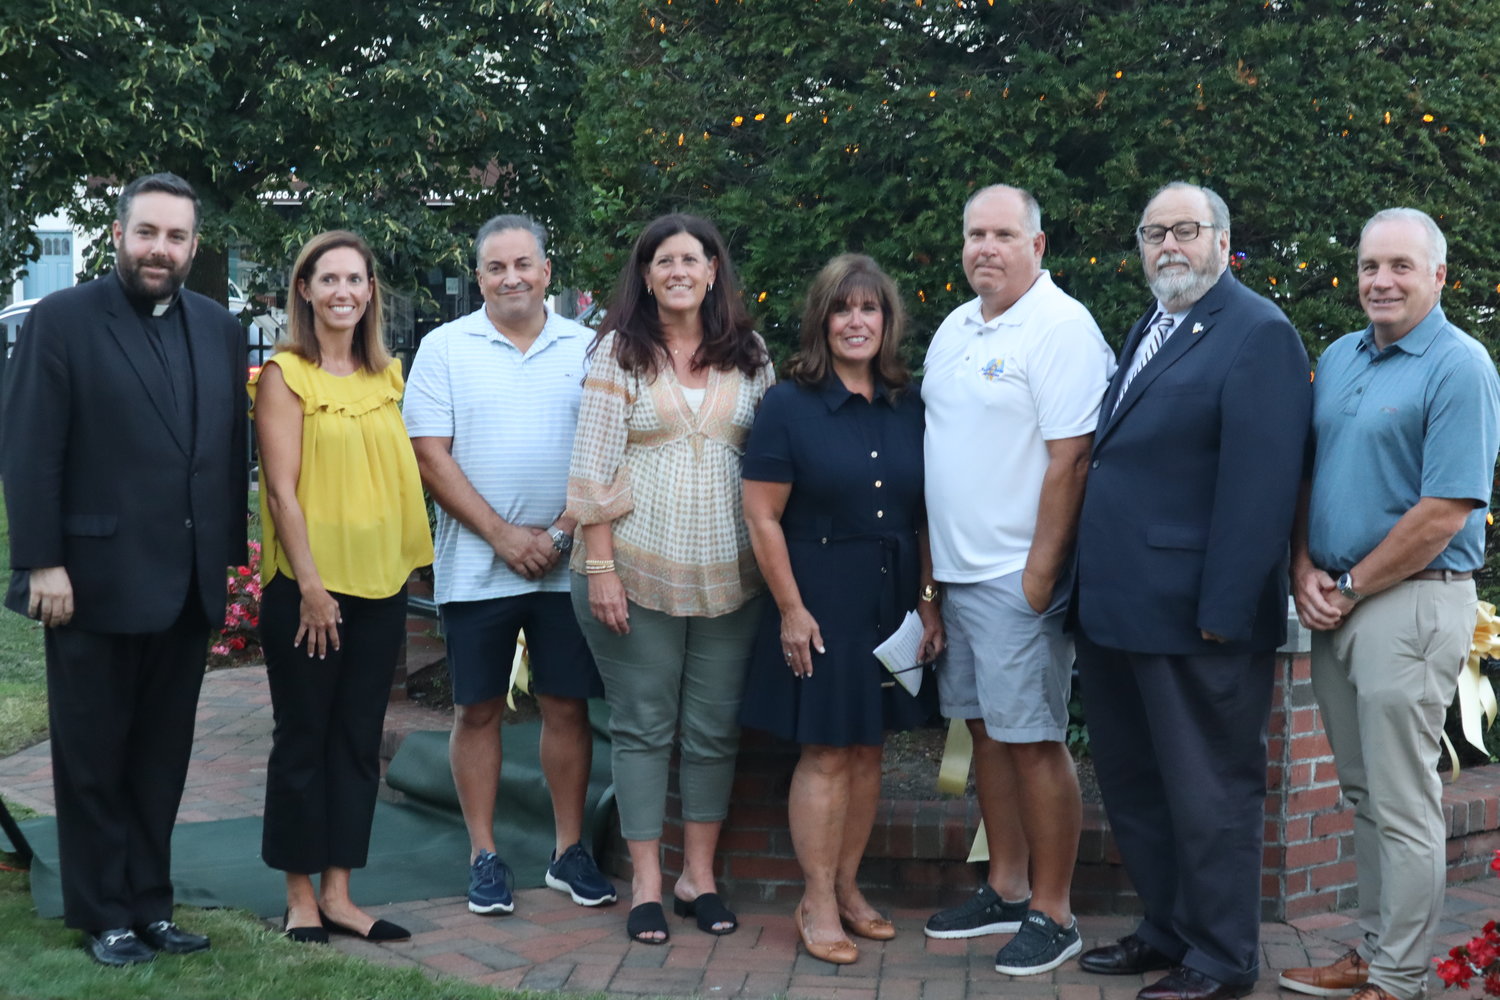 Mayor Francis Murray and the village board presented Carol Ruchalski with a proclamation in recognition of her work spreading awareness of pediatric cancer.